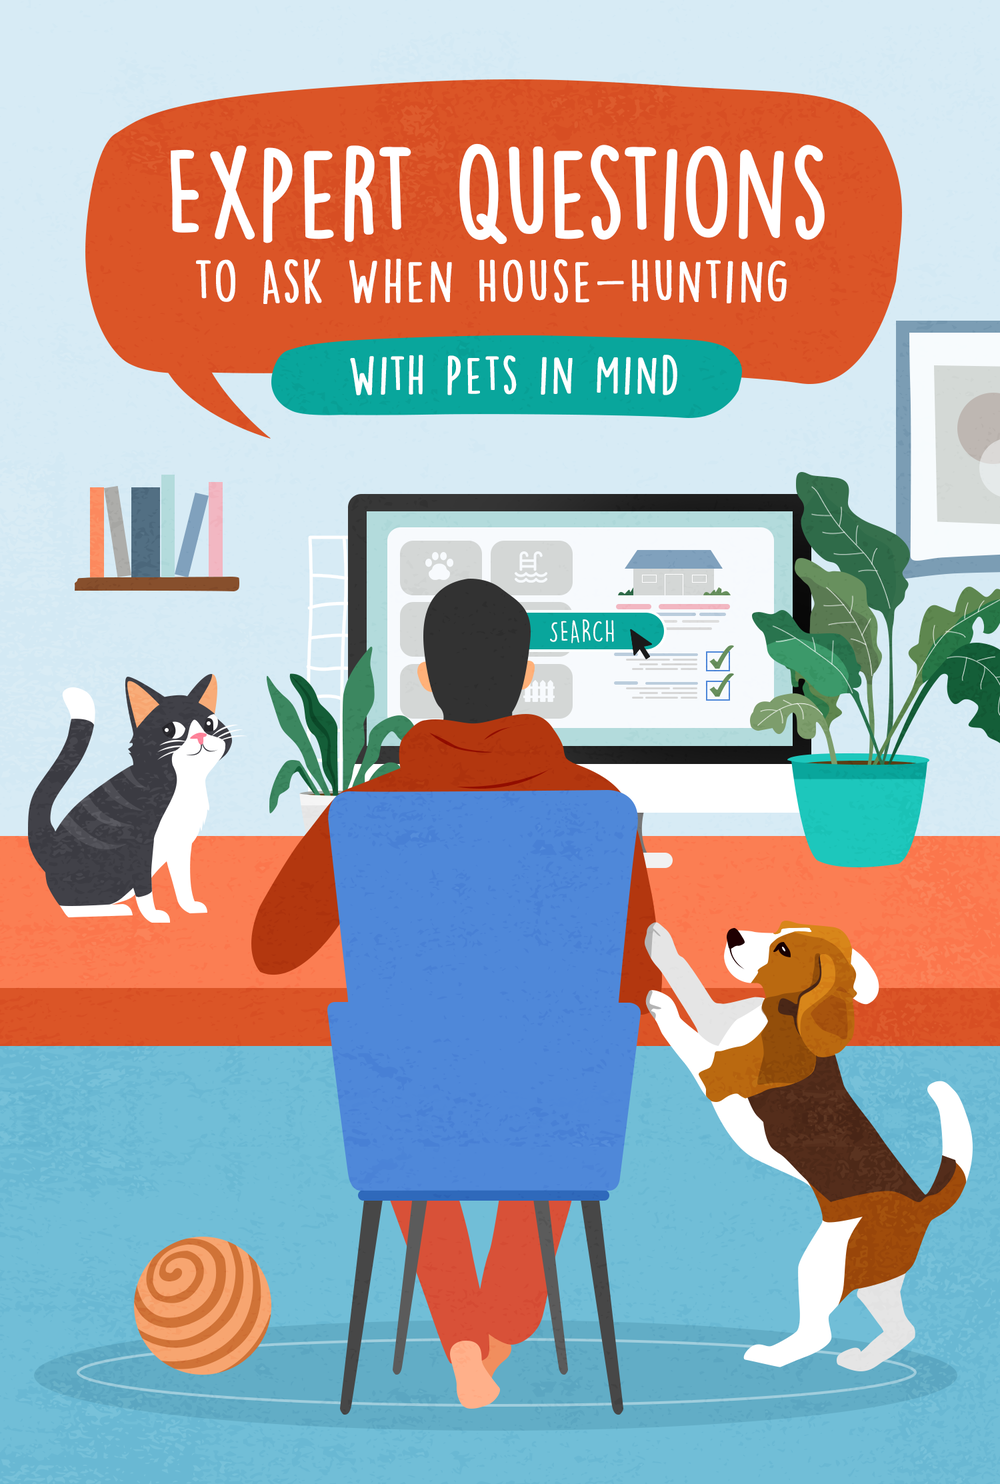 Expert Questions to Ask When House-Hunting with Pets in Mind